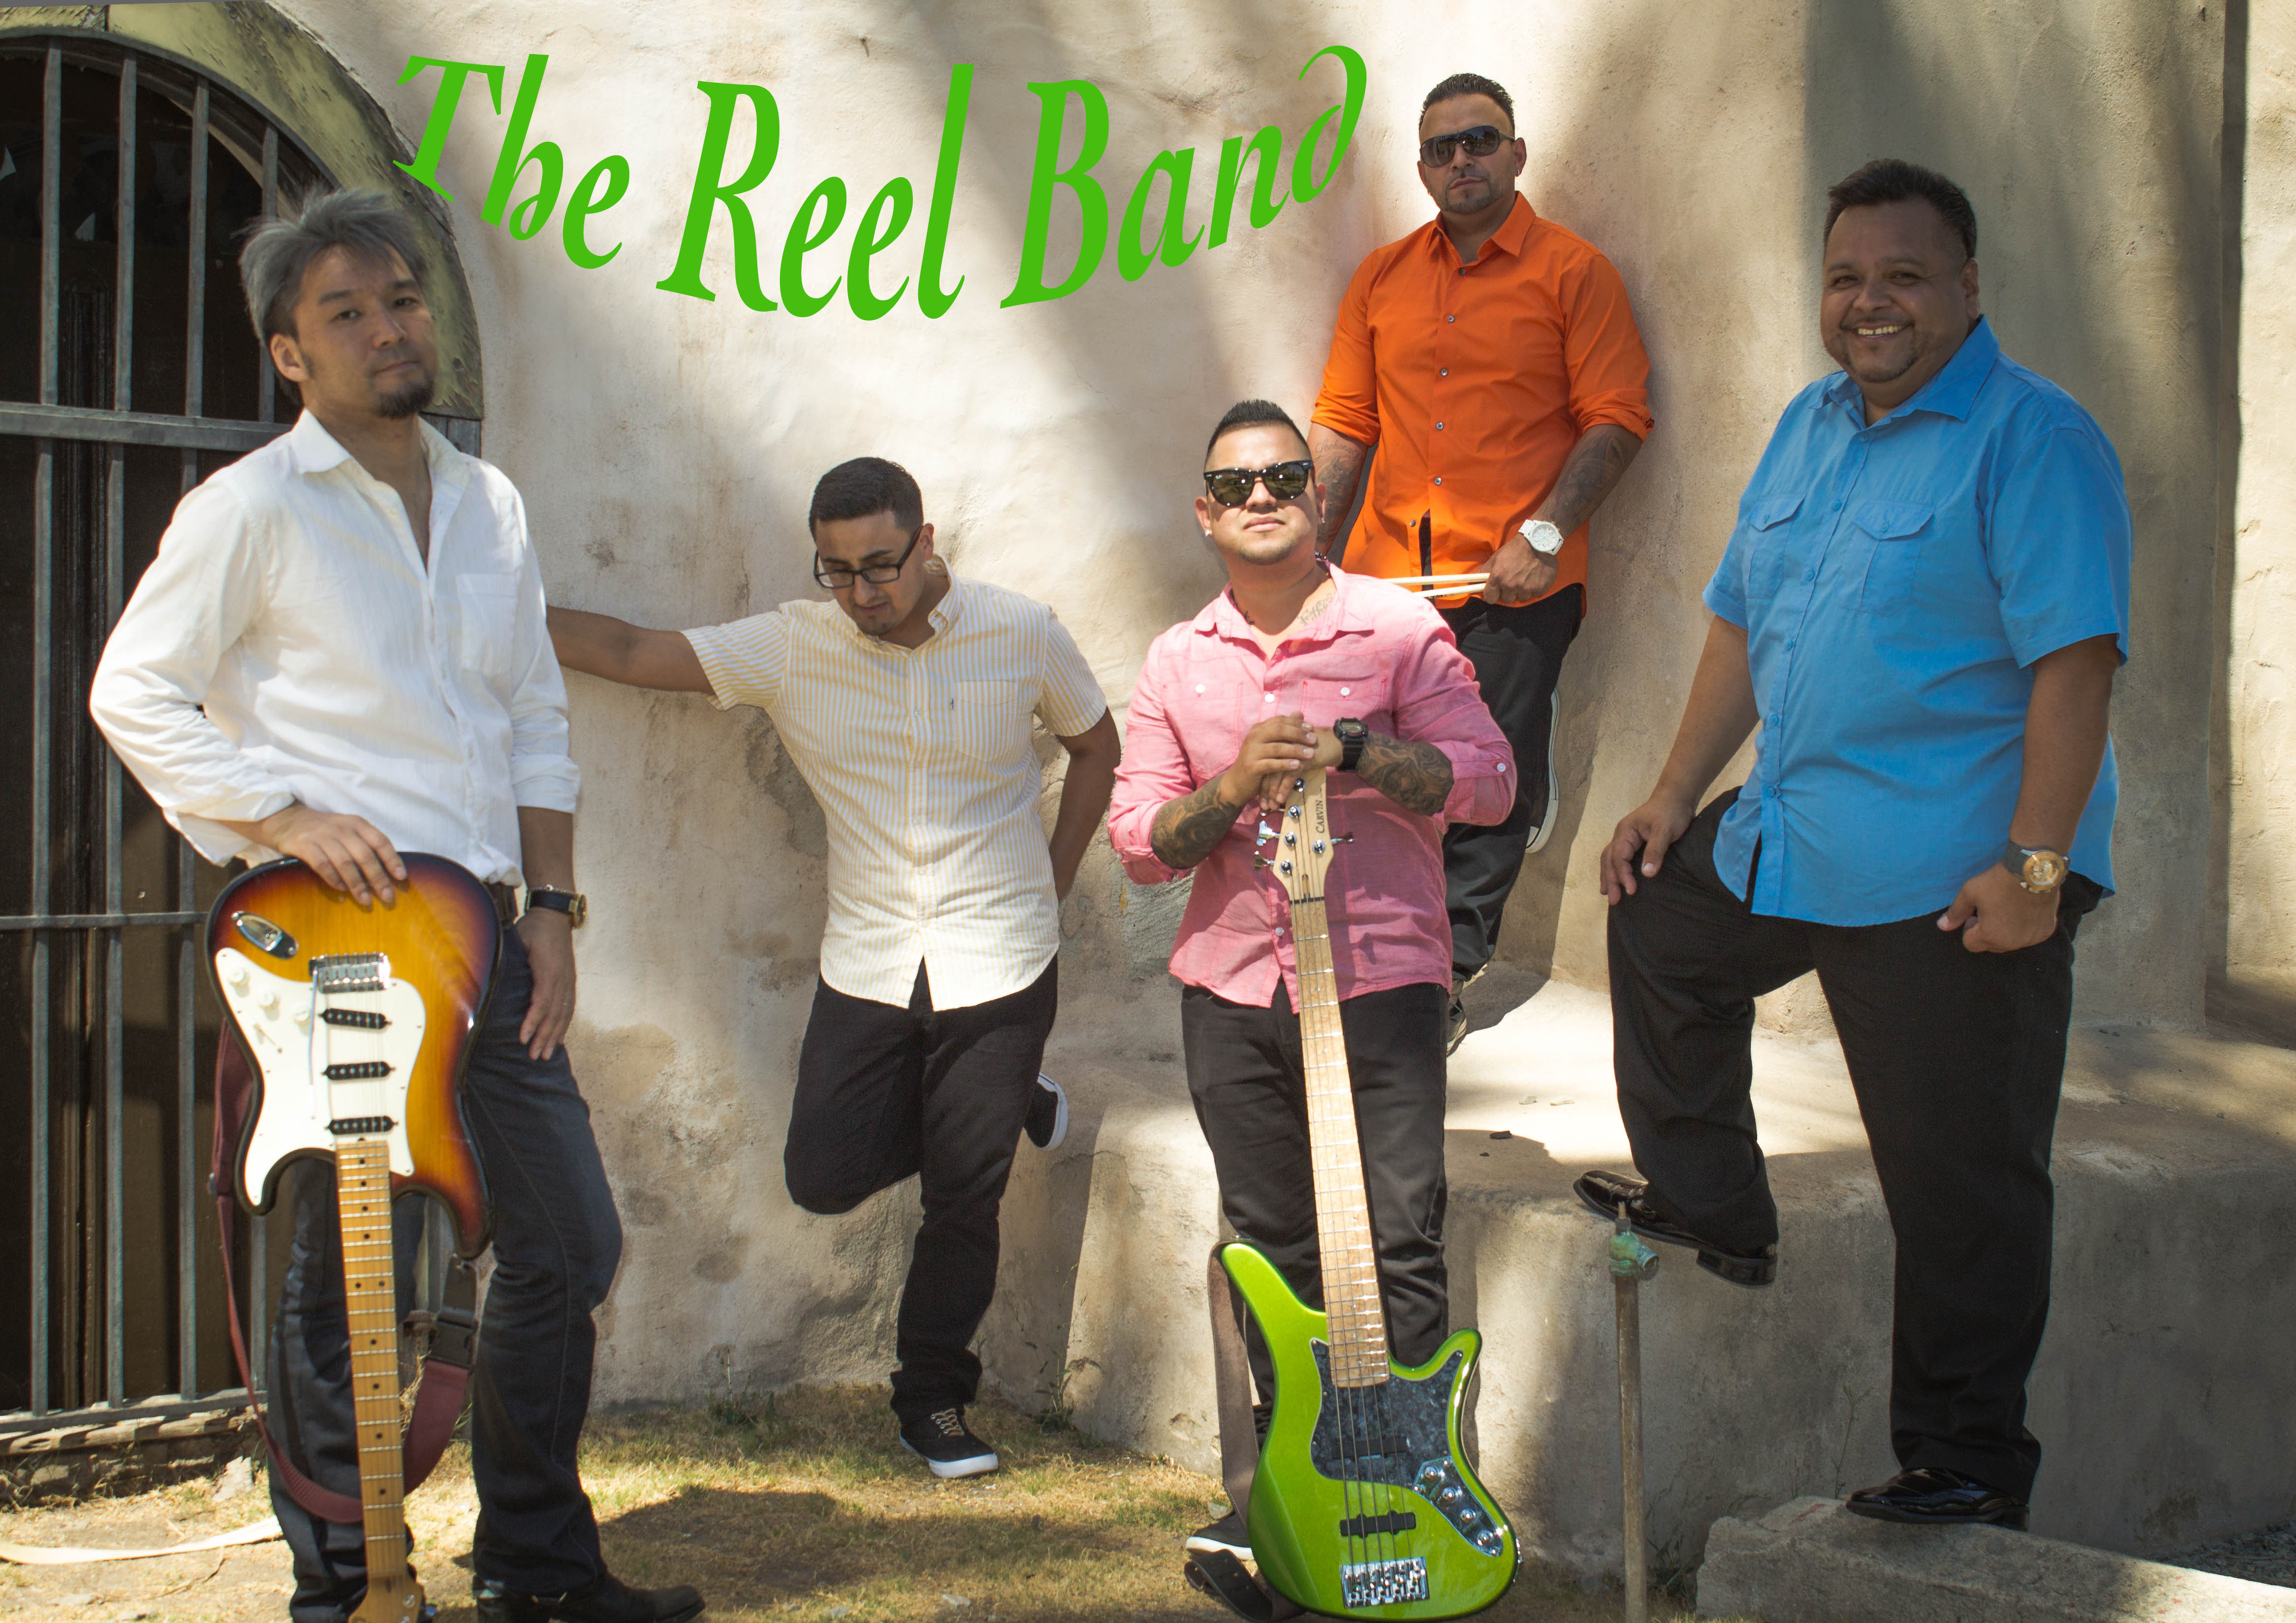 The Reel Band